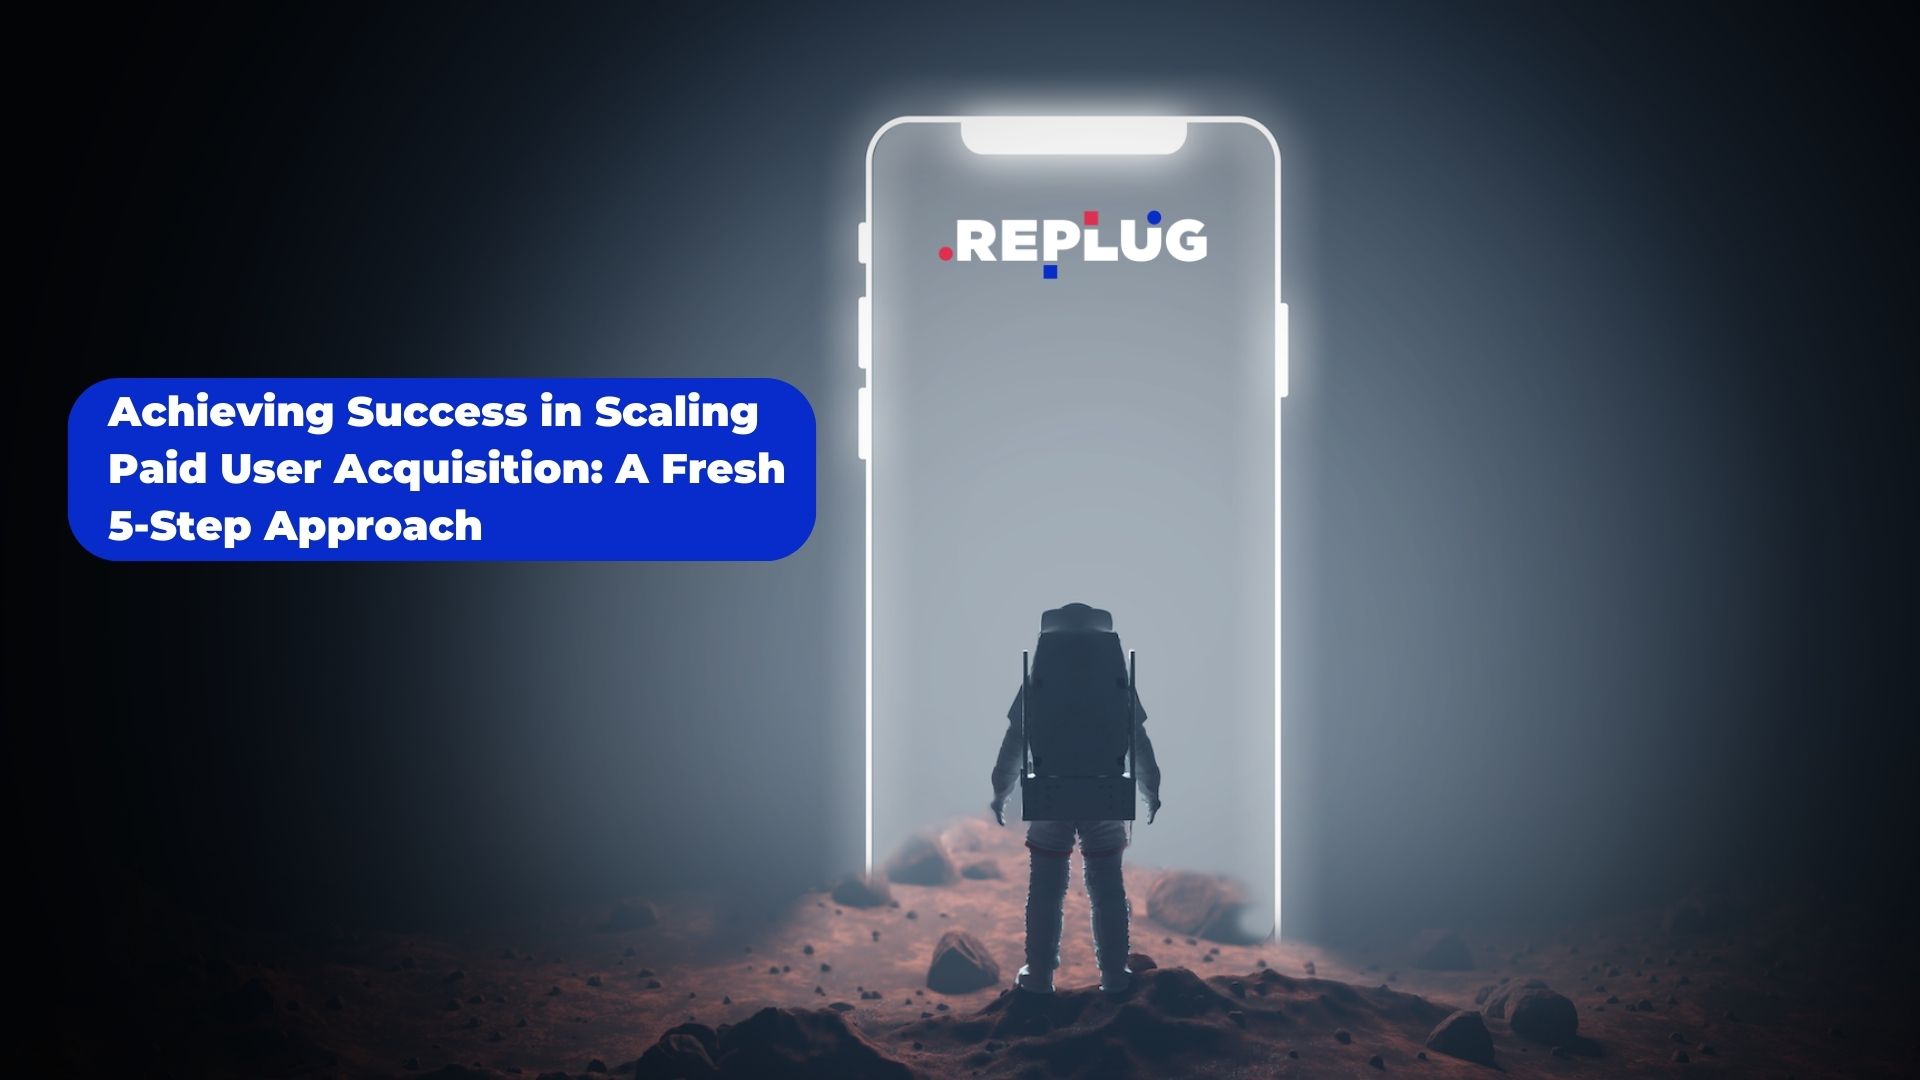 Achieving success in scaling paid user acquisition: A fresh 5-step approach